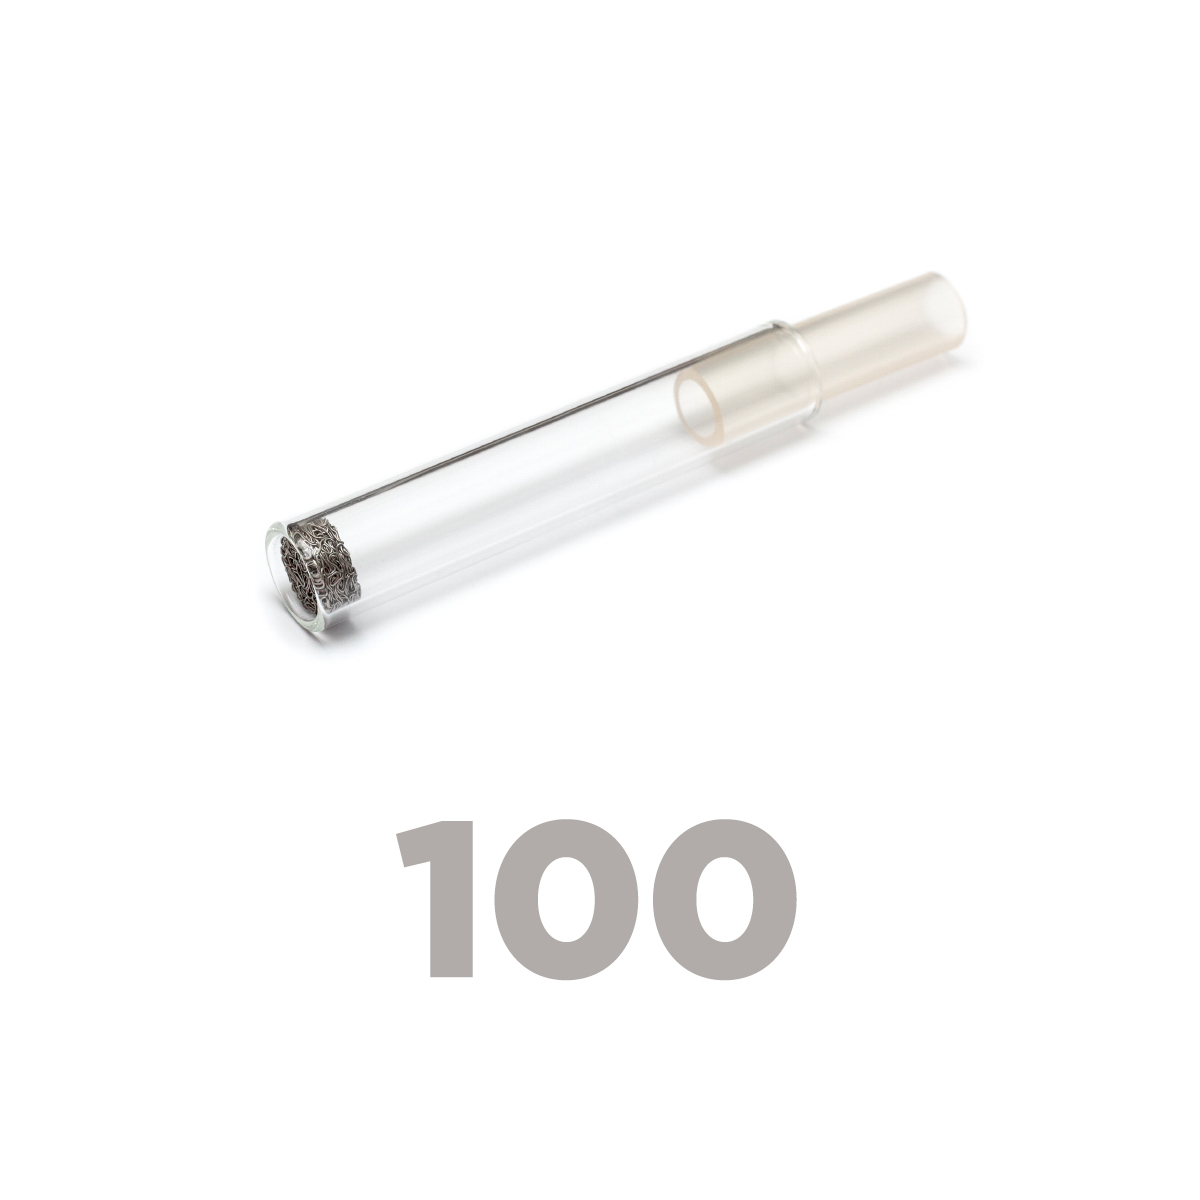 Bulk Pack of 100 Terpan SHORT Pipes, Gauzes, and Mouth Pieces